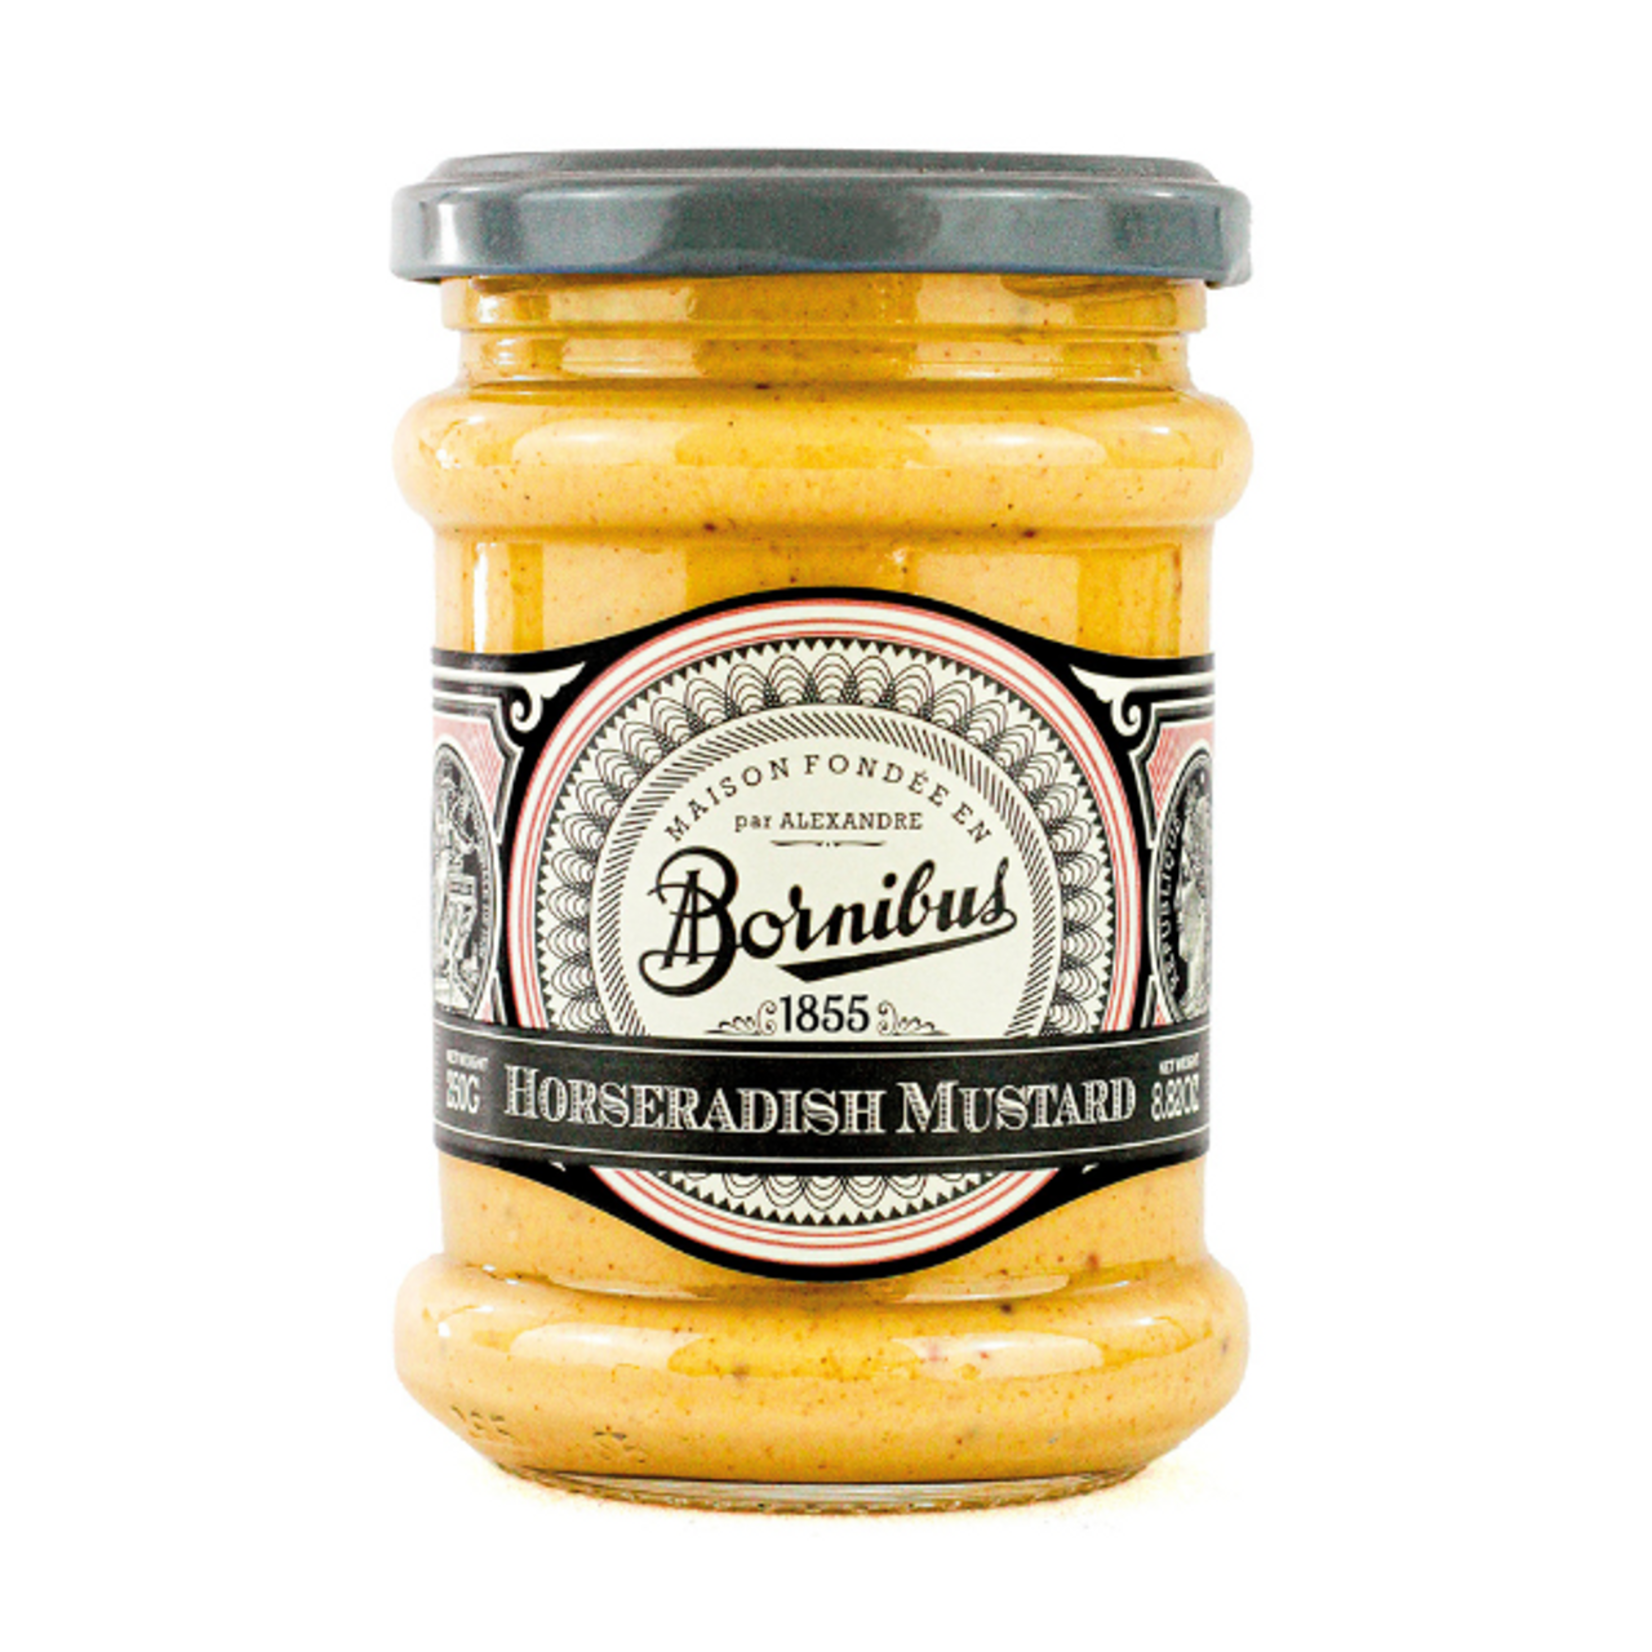 The French Farm Mustard